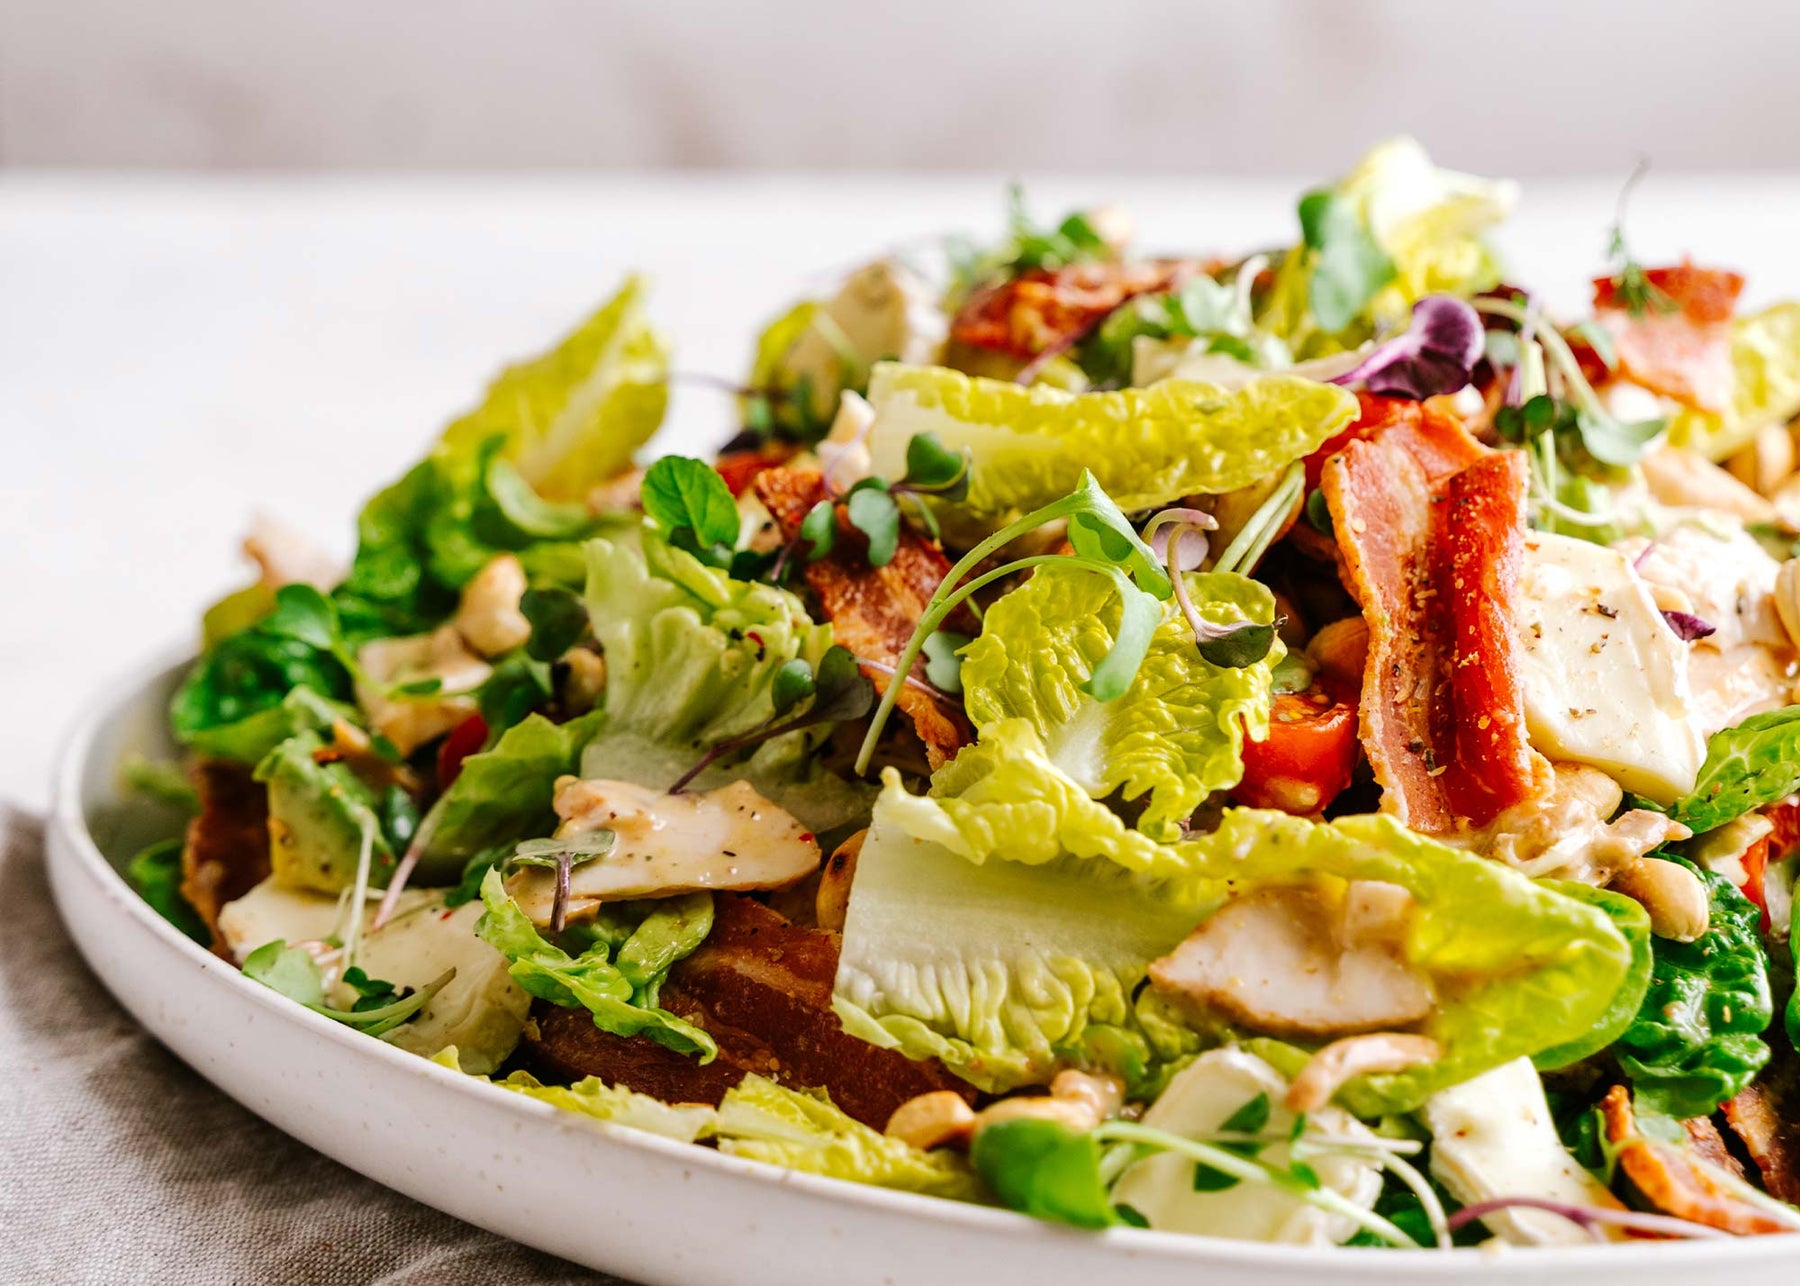 Chicken & Bacon Salad With Dude Ranch Dressing